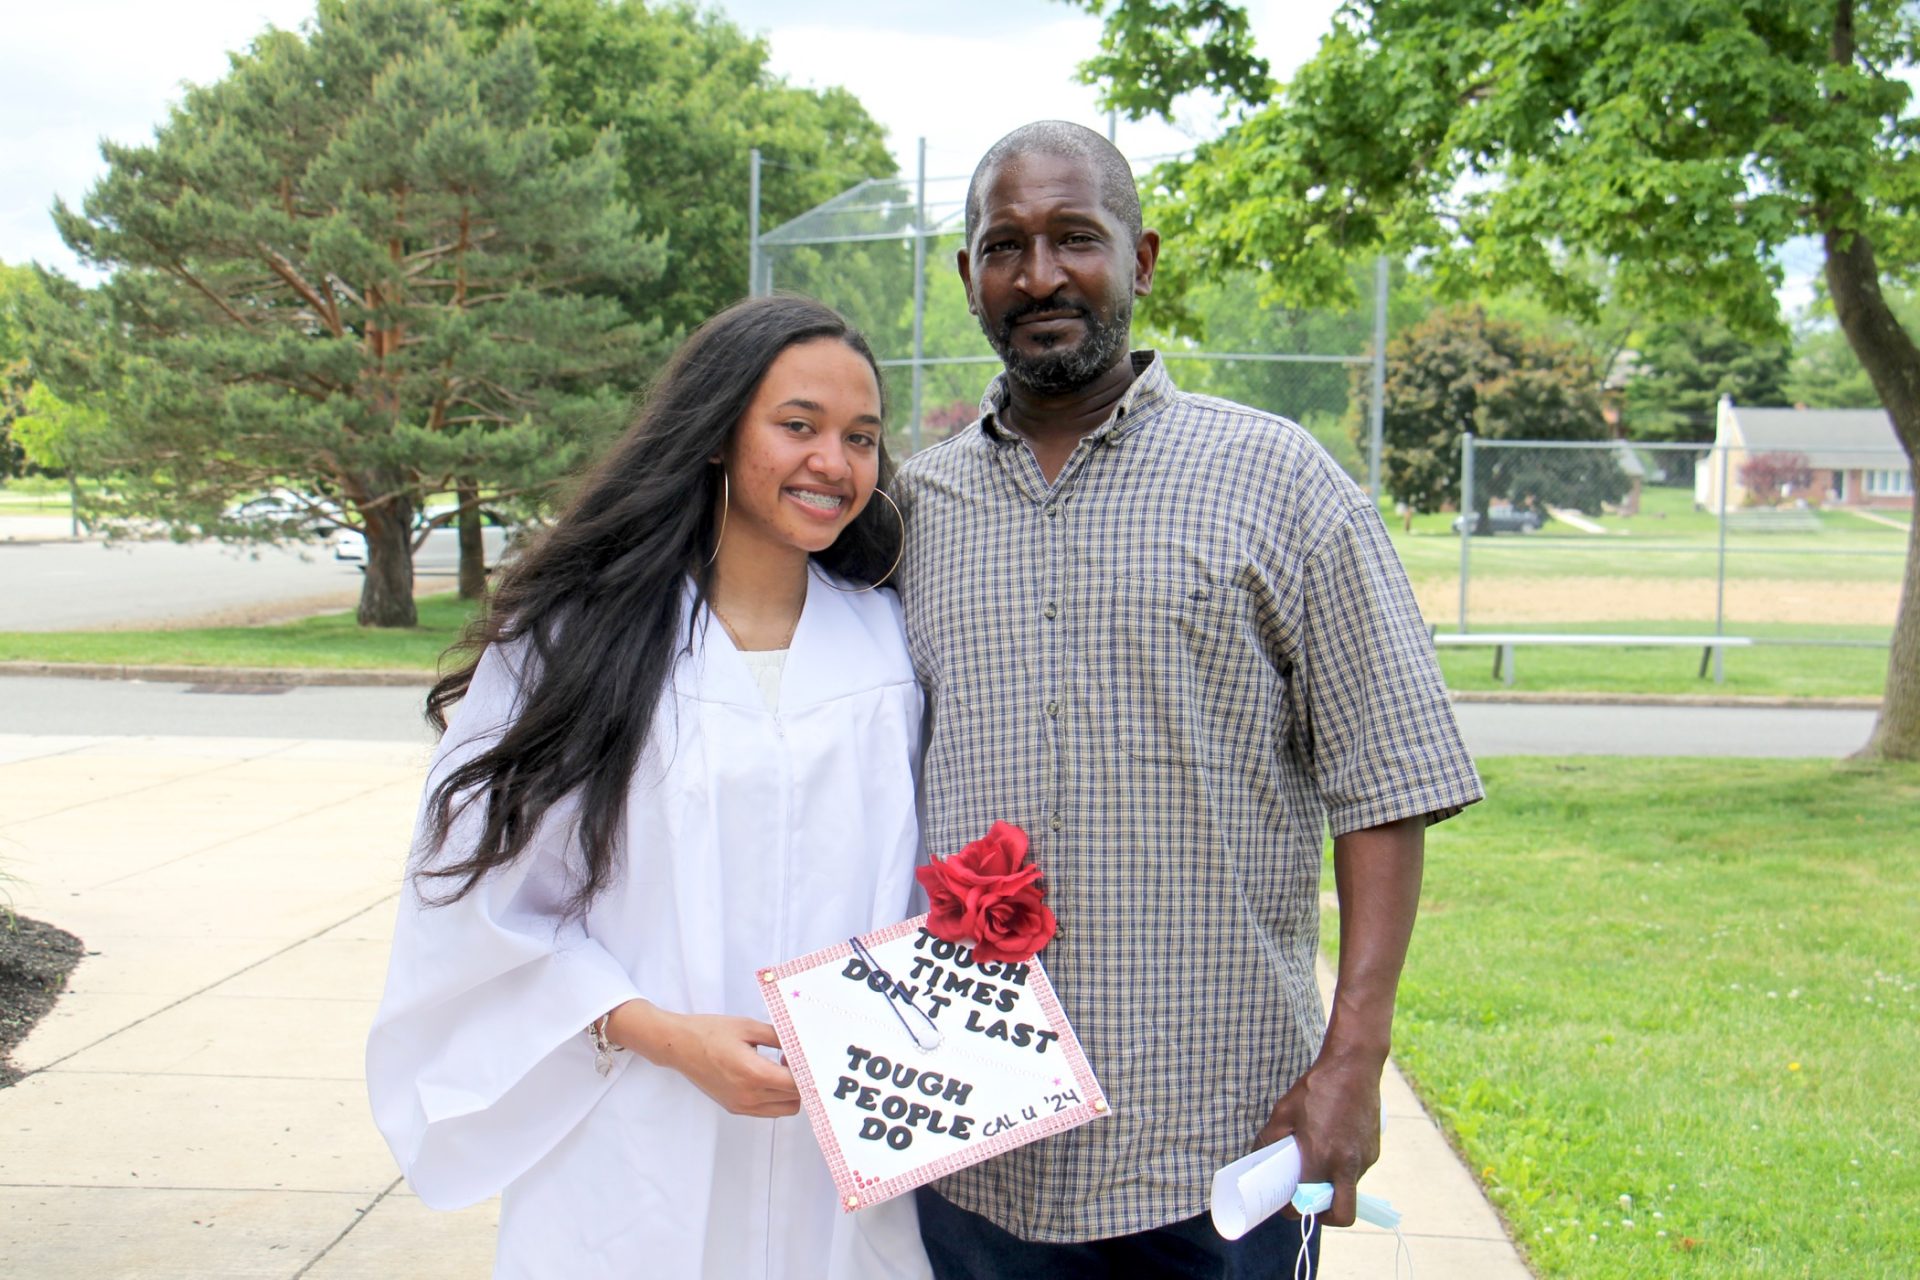 Pottstown High School senior Melissa Coleman poses with her father, James Coleman, after a socially distant graduation ceremony.